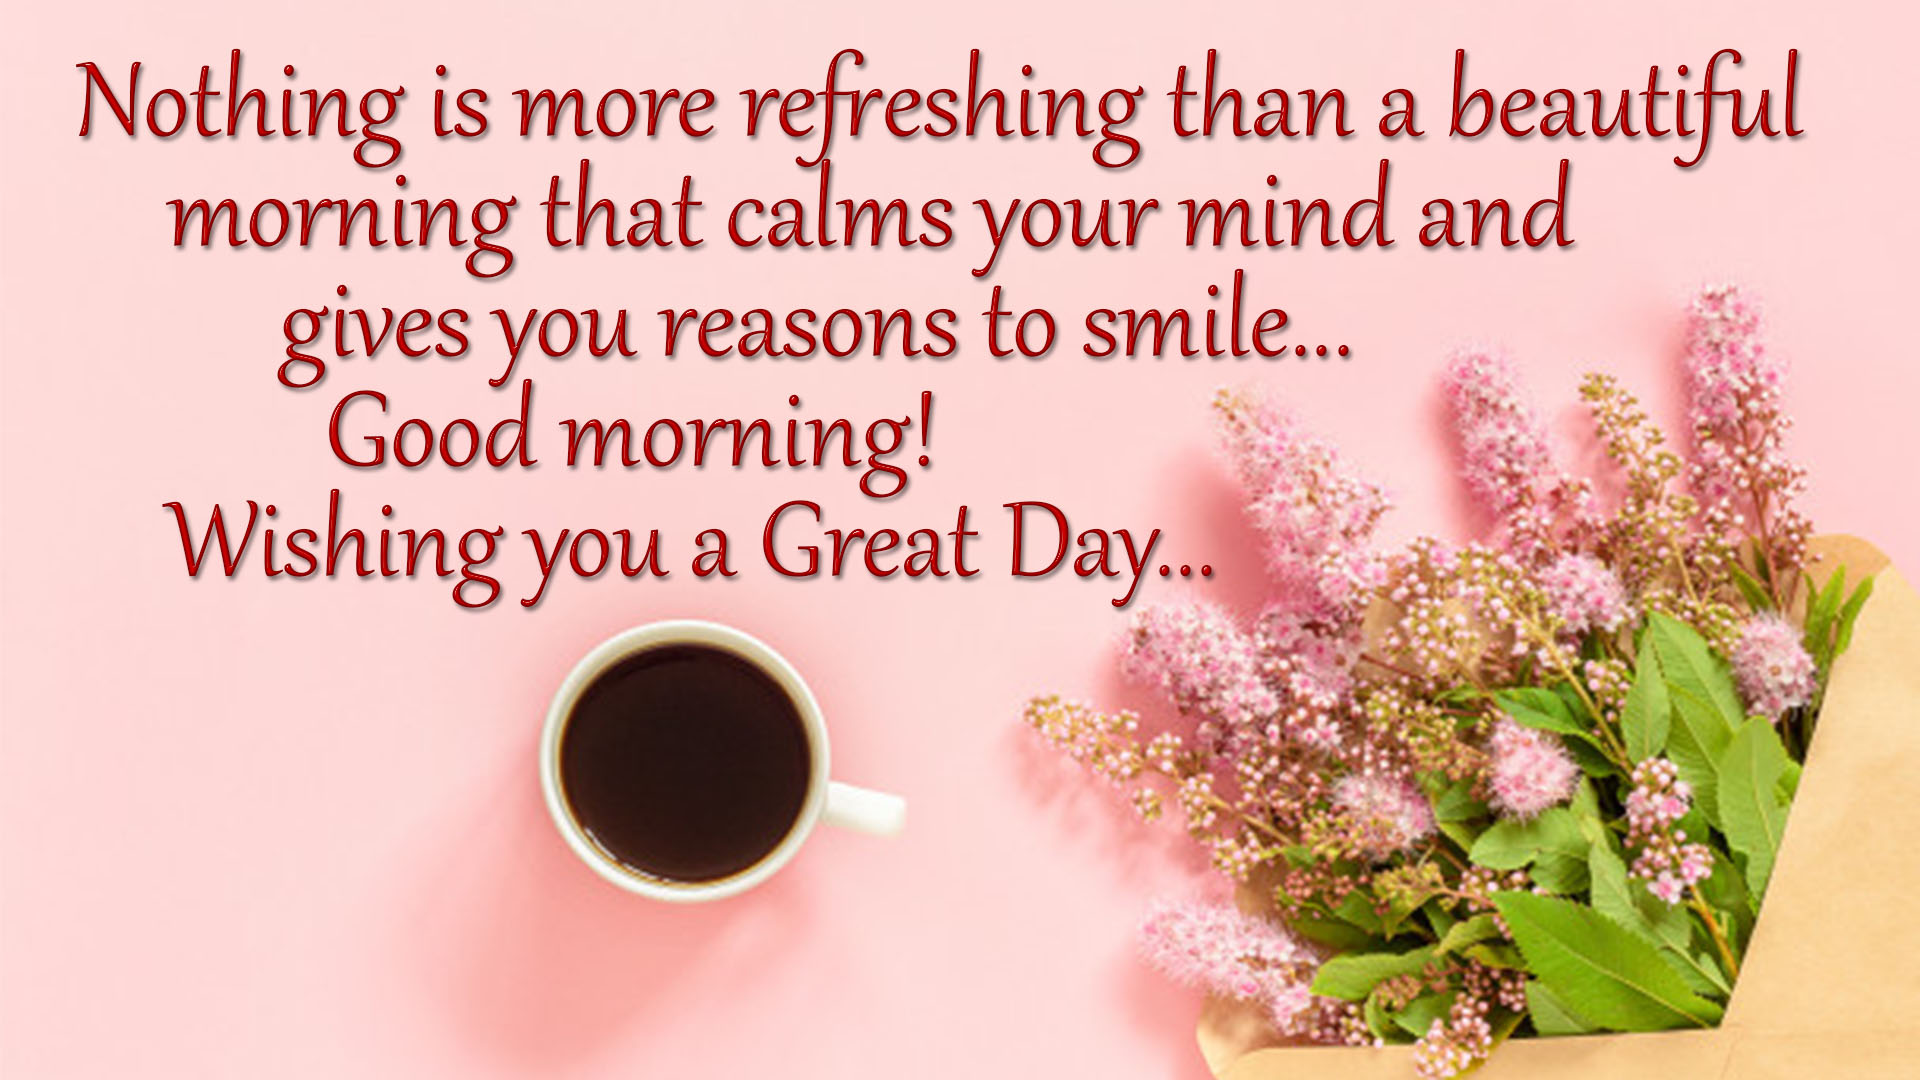 Good Morning Wishes, Greetings & Messages Images Download